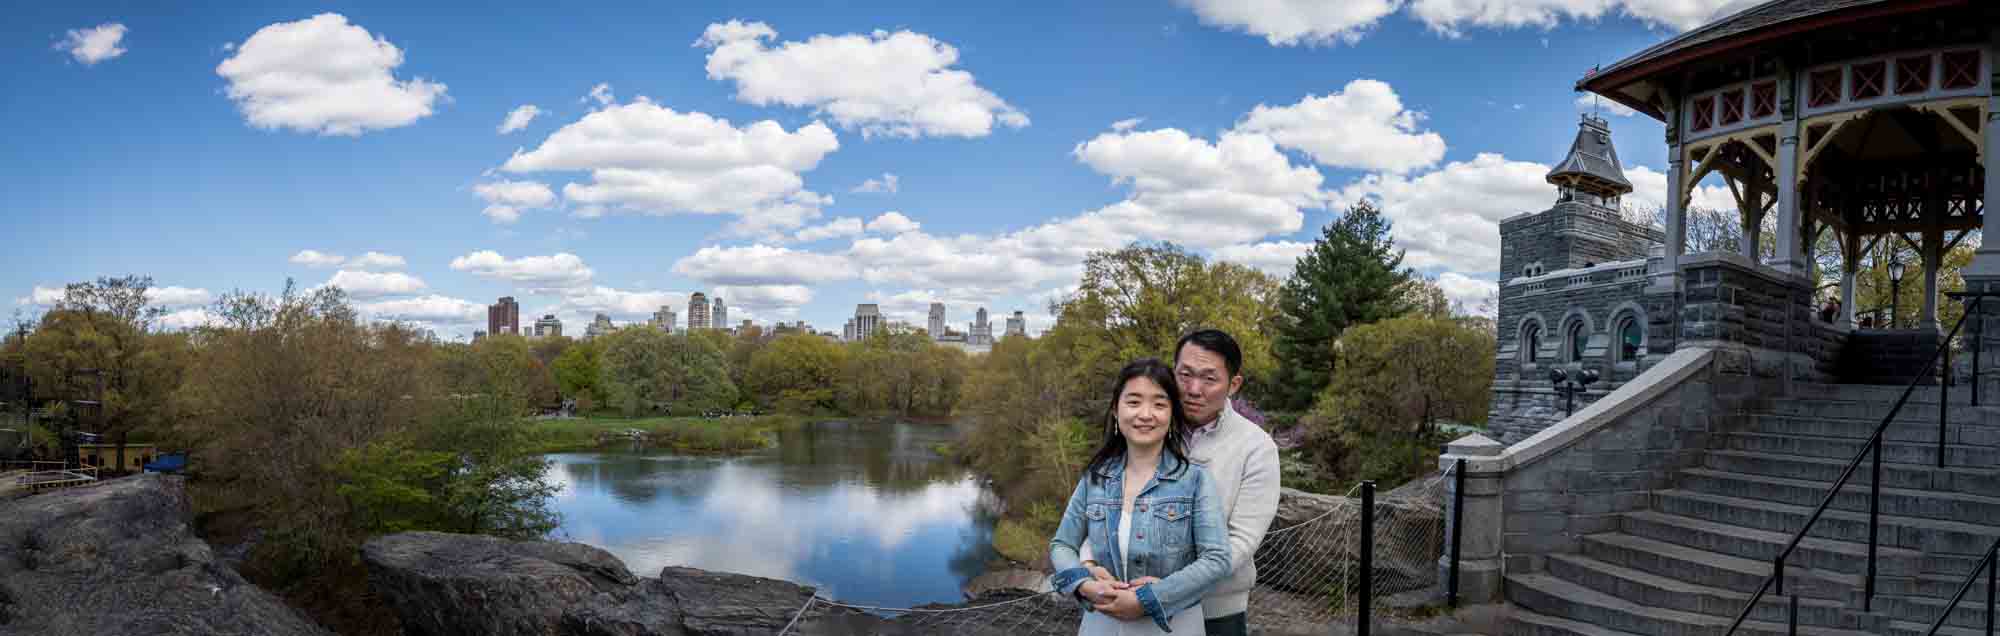 Couple hugging in front of Turtle Pond in Central Park